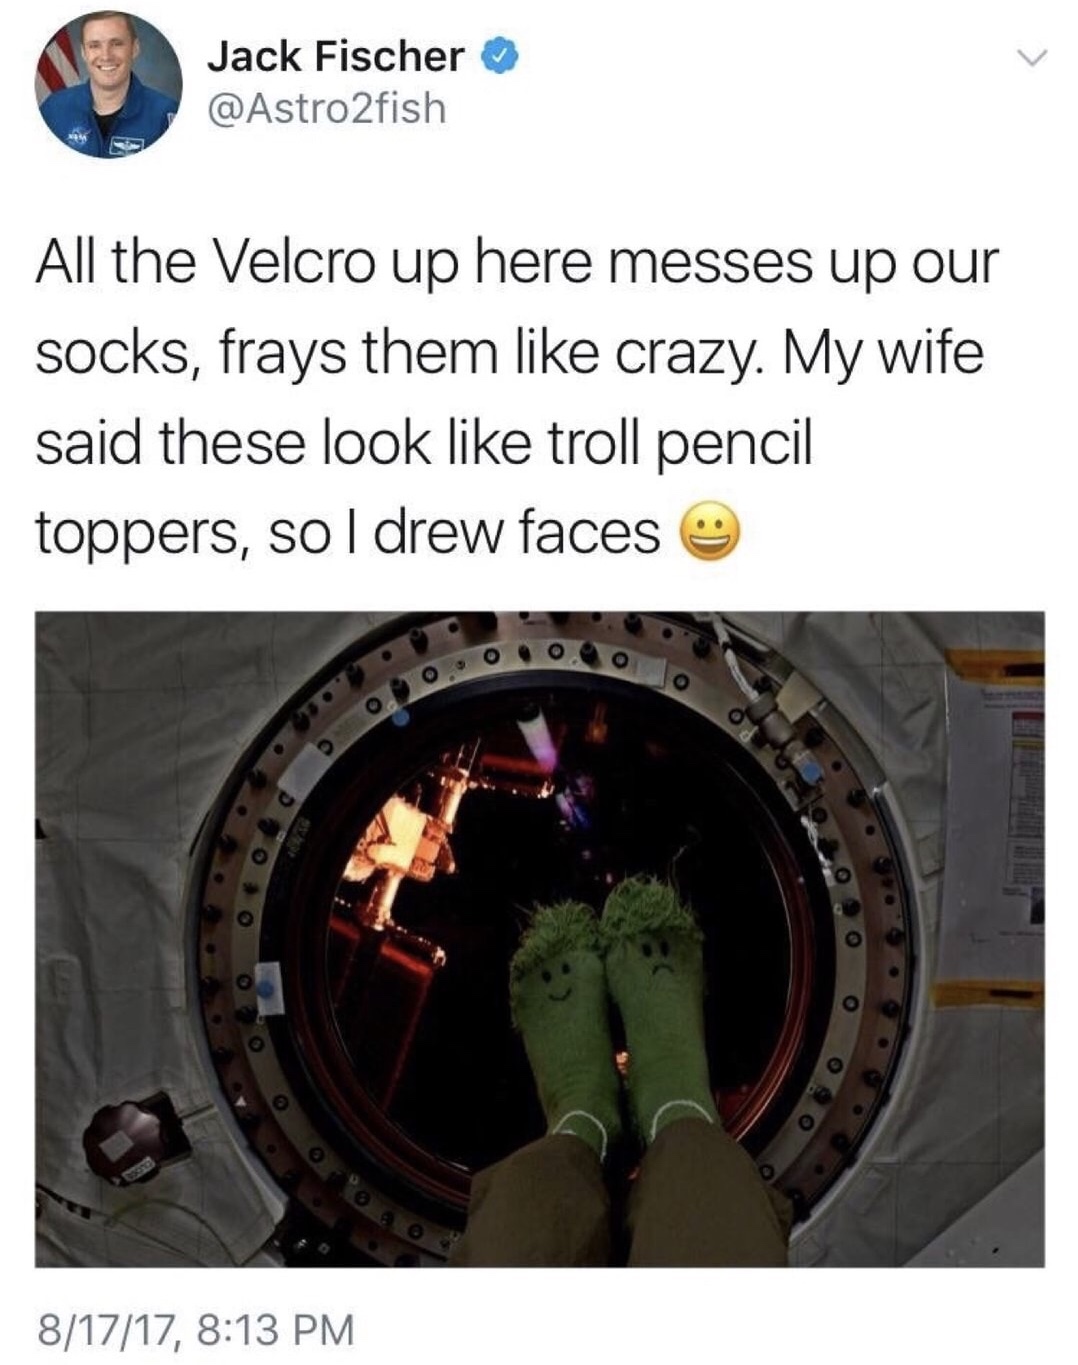 memes - Jack Fischer All the Velcro up here messes up our socks, frays them crazy. My wife said these look troll pencil toppers, so I drew faces e 81717,